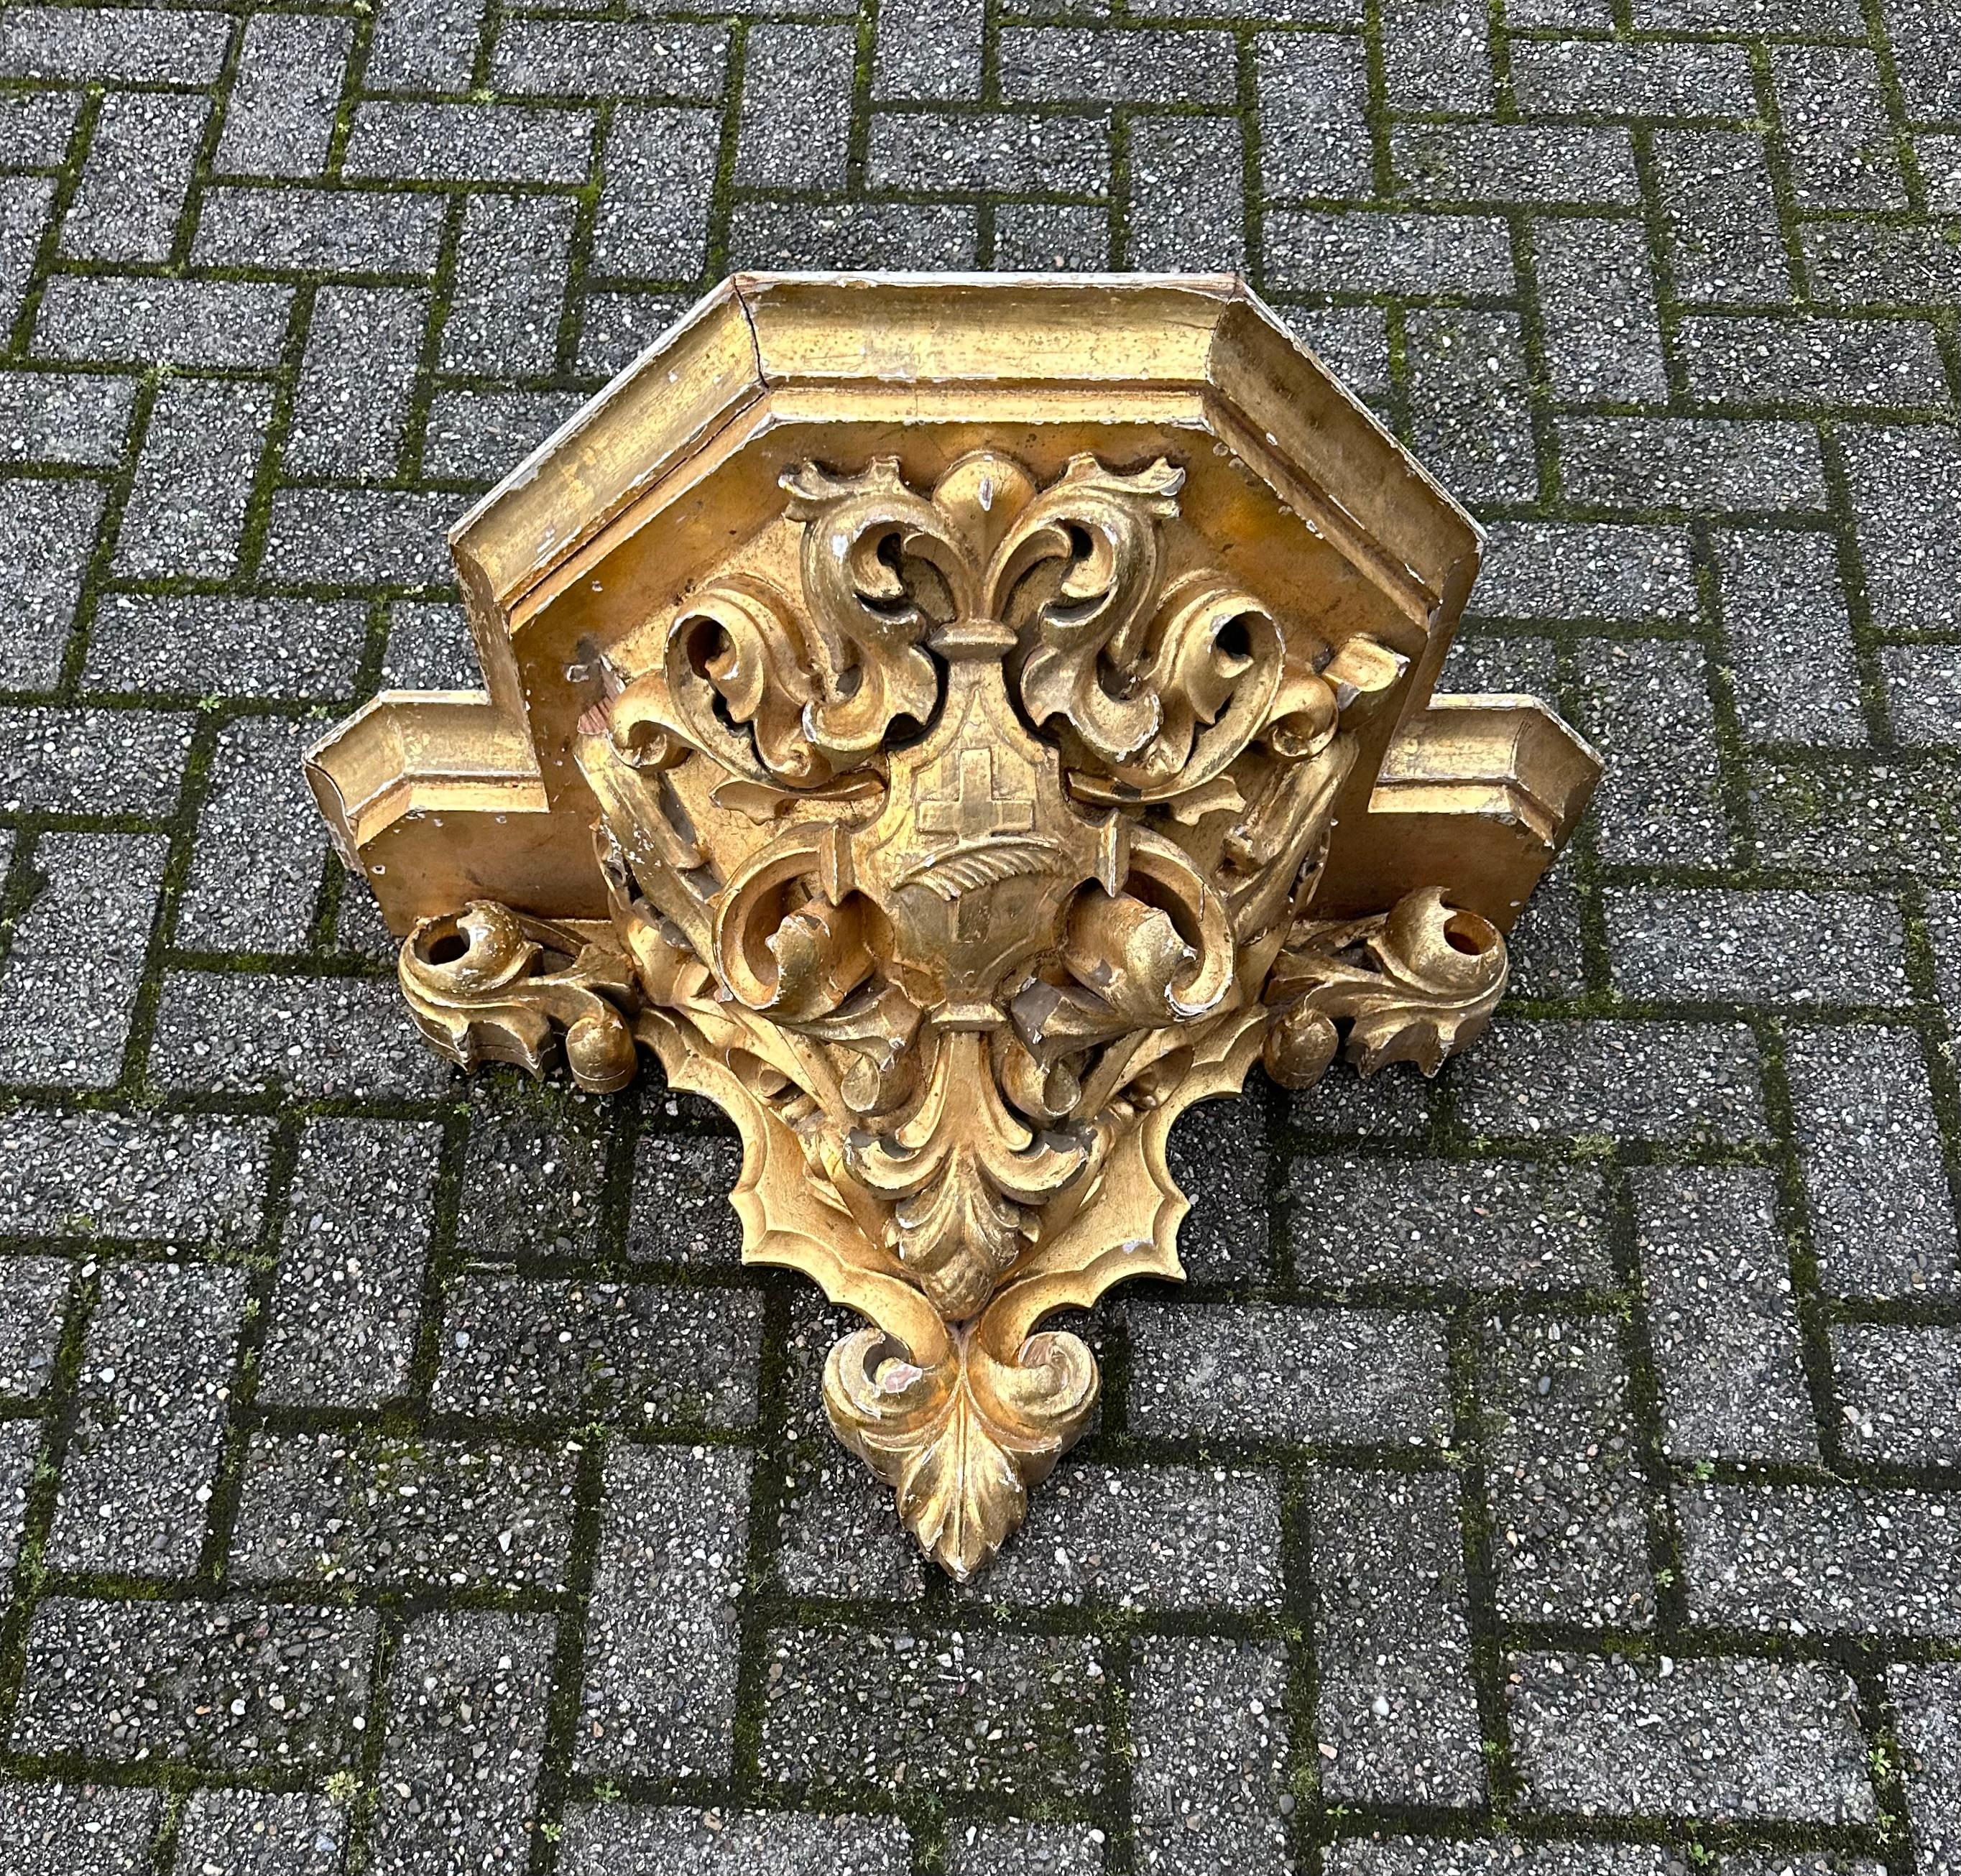 Deeply carved, extra large size, Gothic Revival corbel, bracket with a stunning patina.

Finding unique antiques that have just that little bit more than your average is what we always hope and strive to realize. This all handcrafted, Gothic Revival